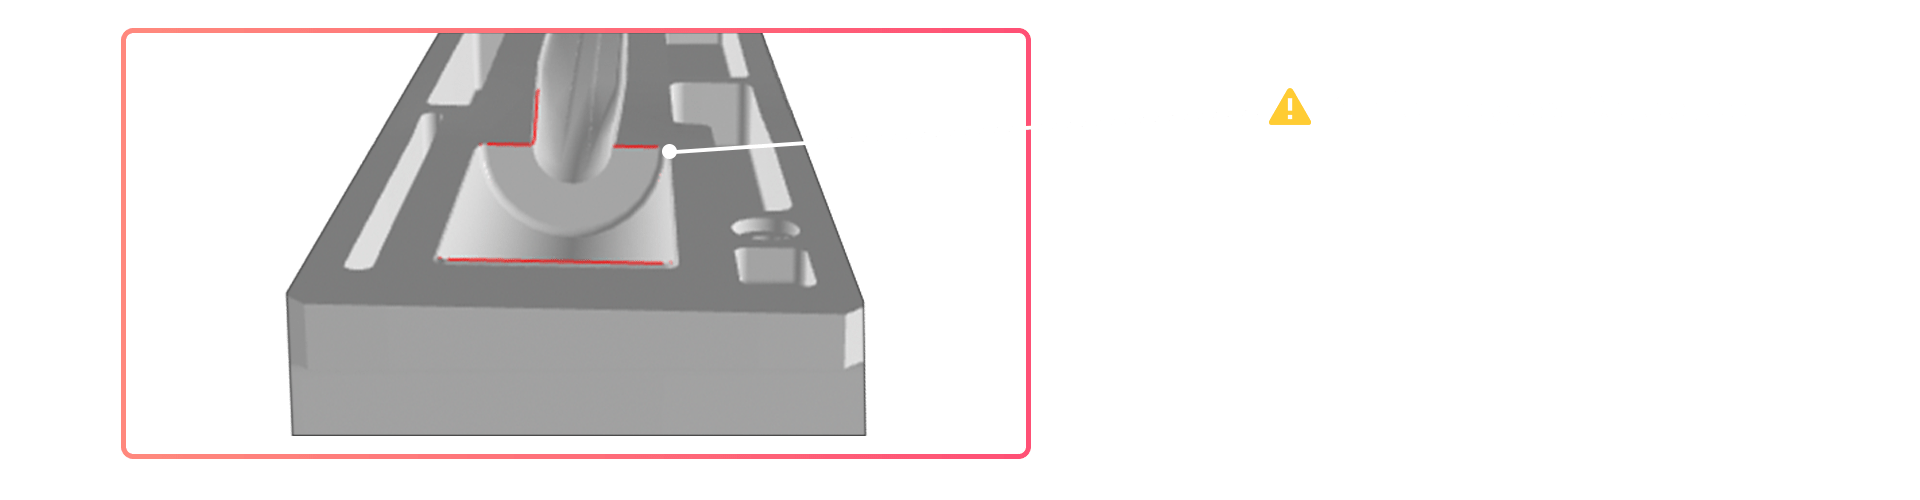 Plyable Knife Edges Example.png